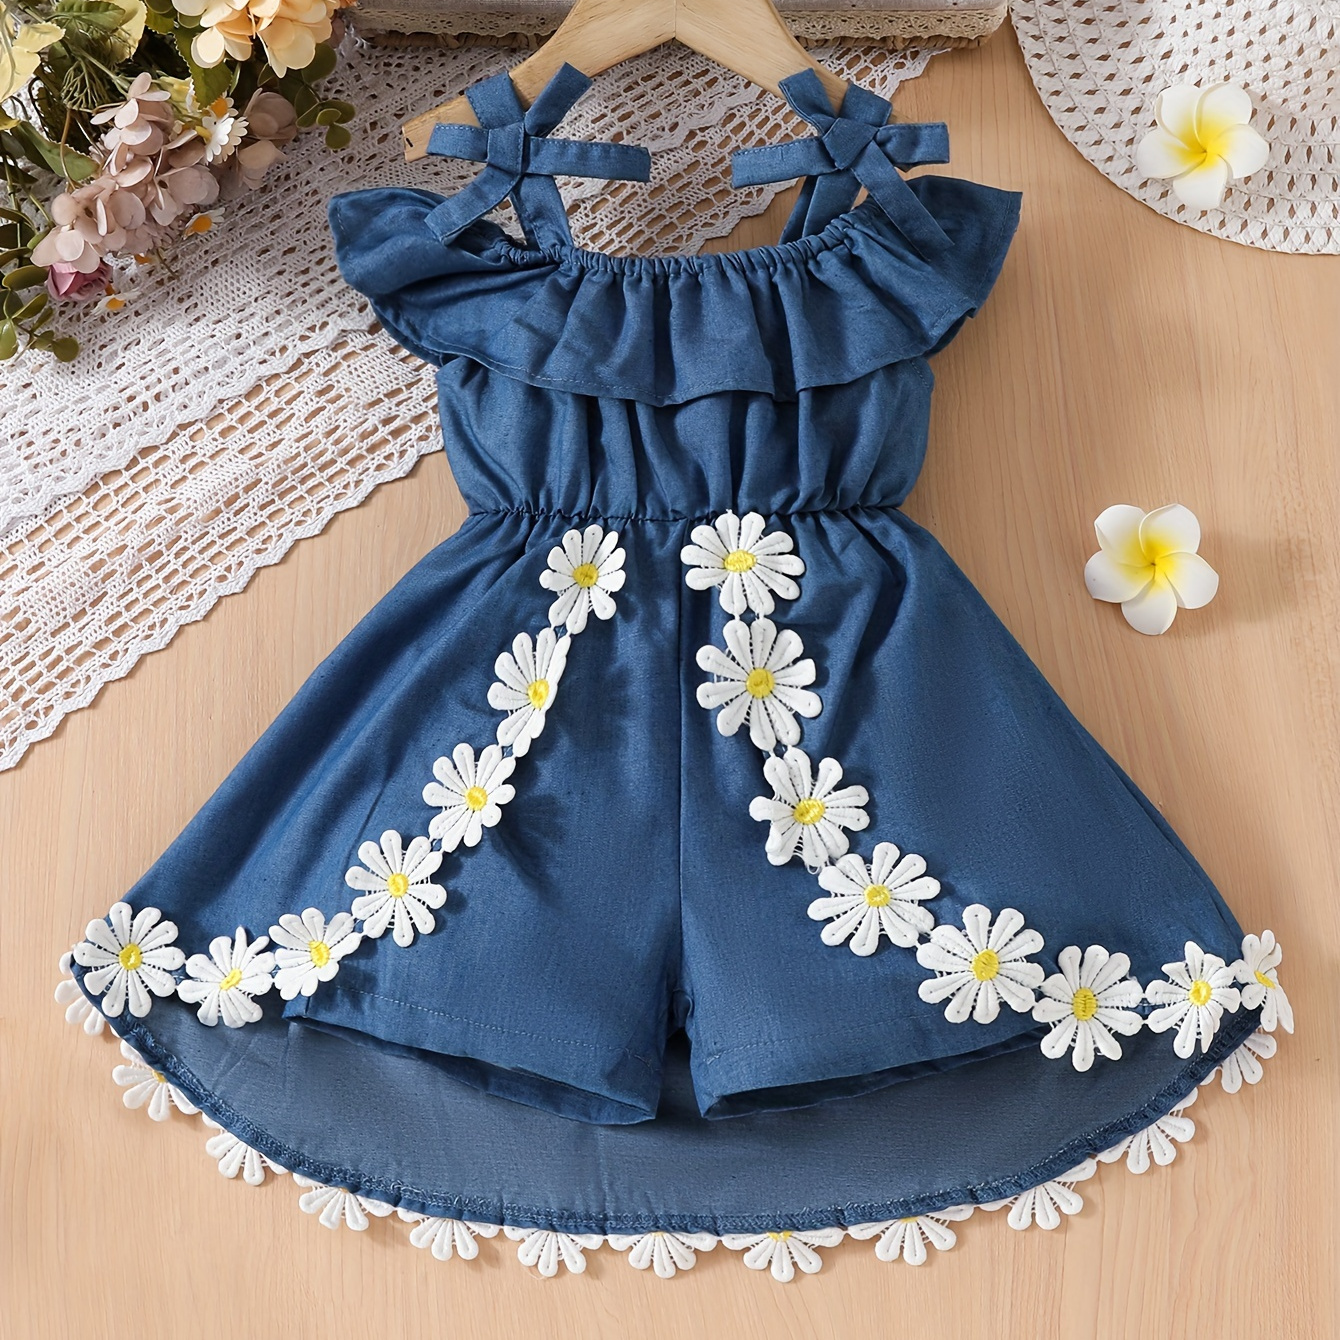 

Baby's Stylish Daisy Embroidered Off-shoulder Dress, Infant & Toddler Girl's Clothing For Summer Holiday Party, As Gift